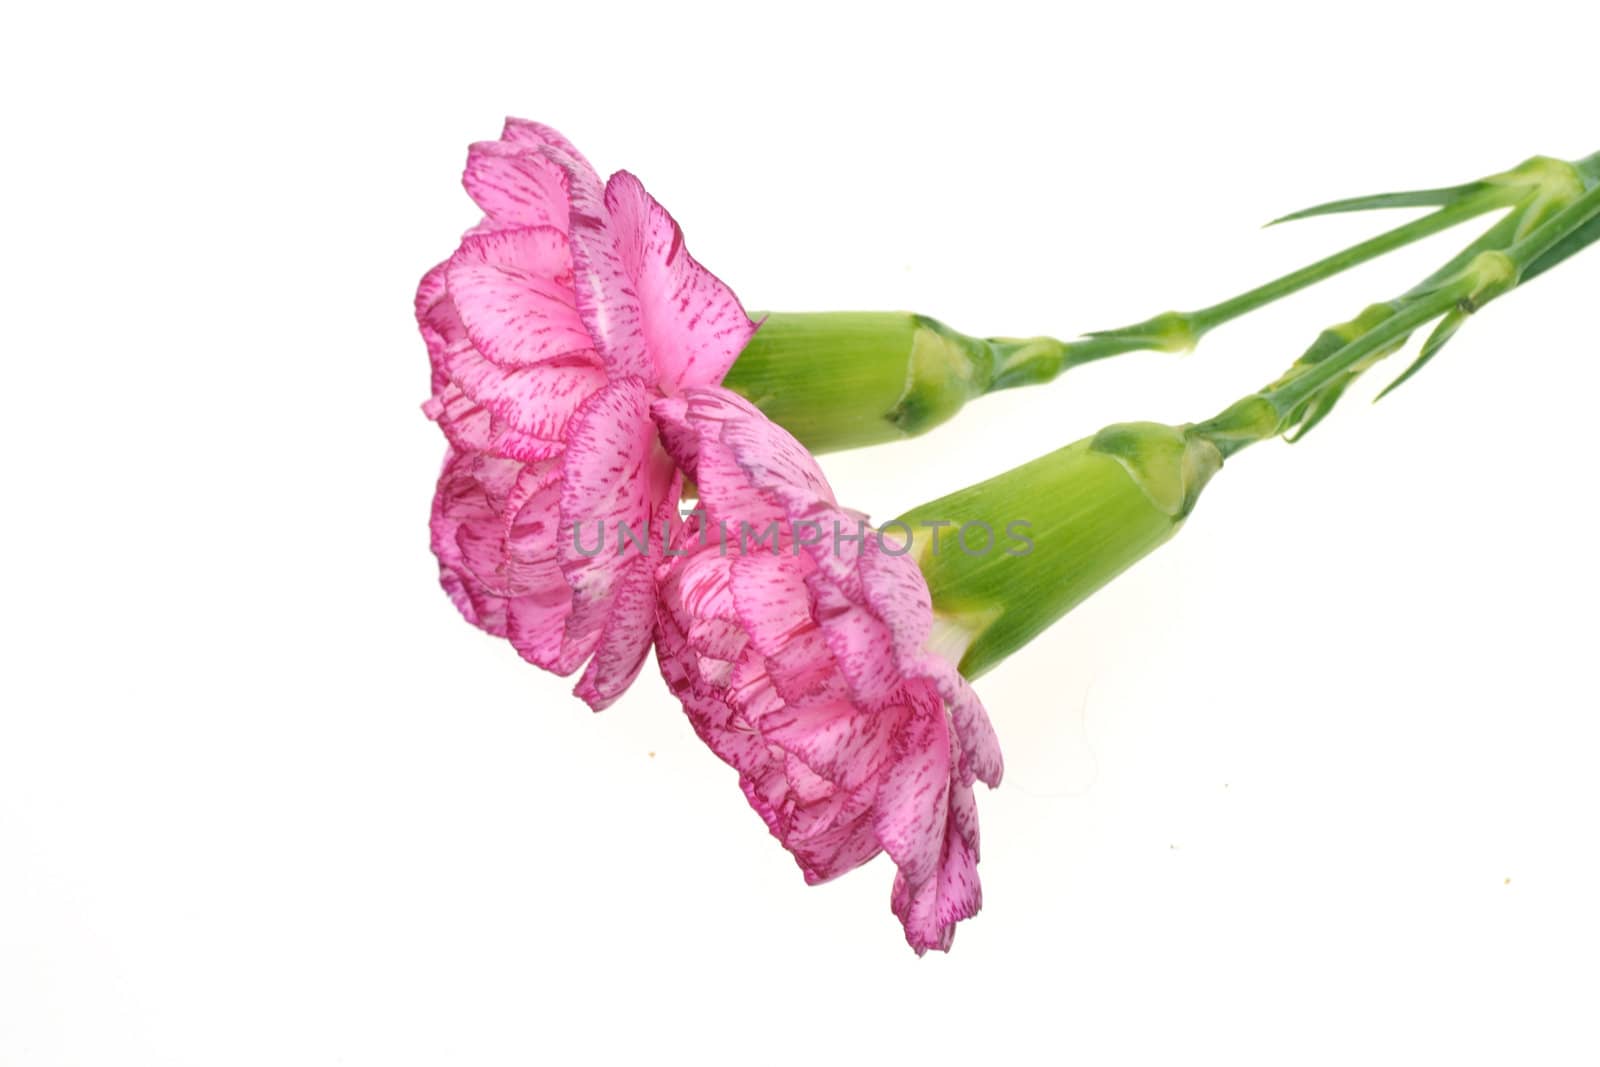 Pair of Pink Carnations from side